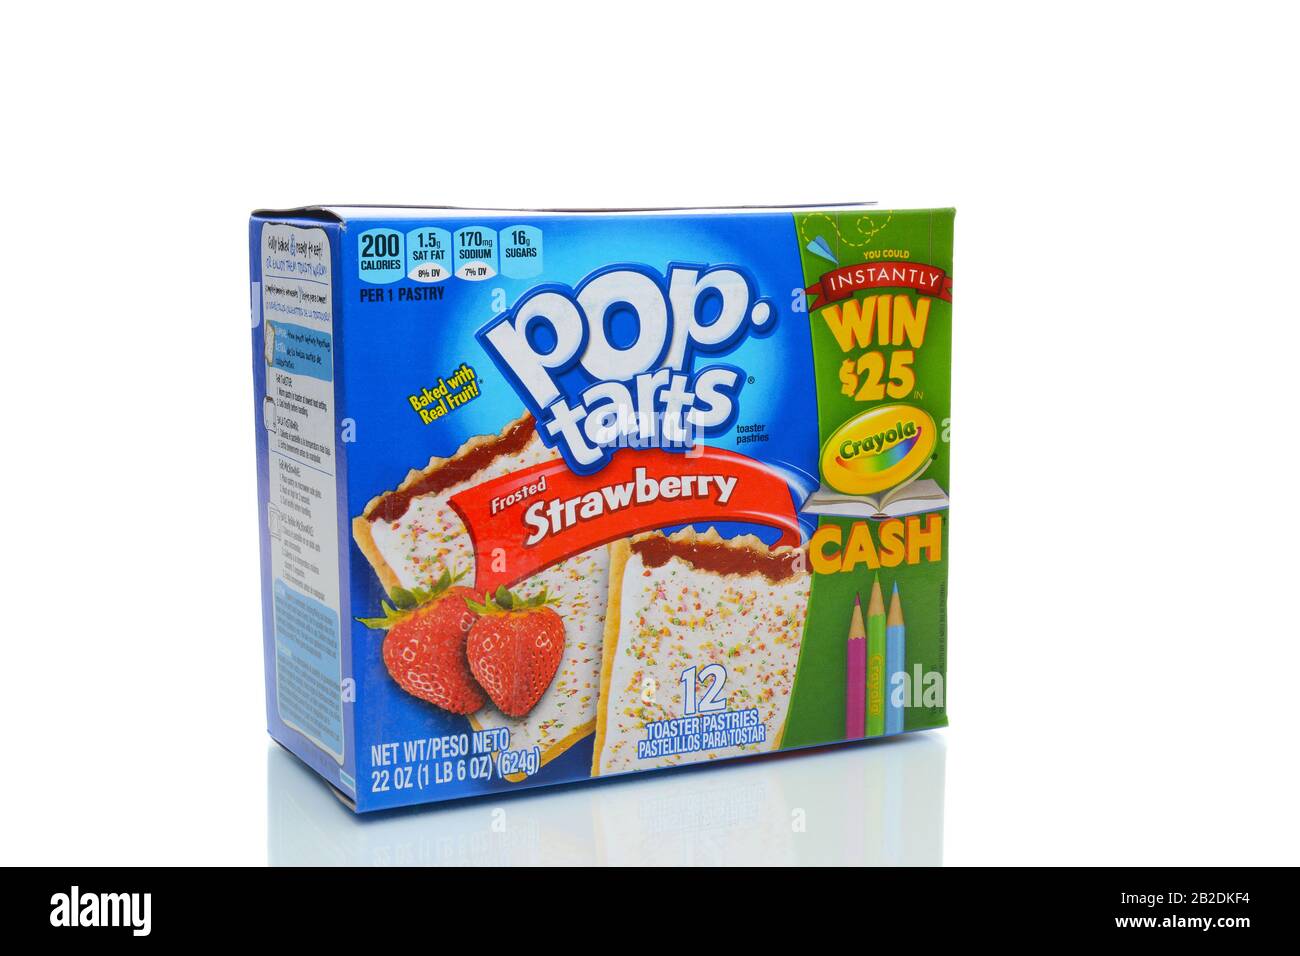 IRVINE, CA - JANUARY 4, 2018: Strawberry Pop Tarts. a brand pre-baked, convenience food toaster pastries that the Kellogg Company introduced in 1964. Stock Photo